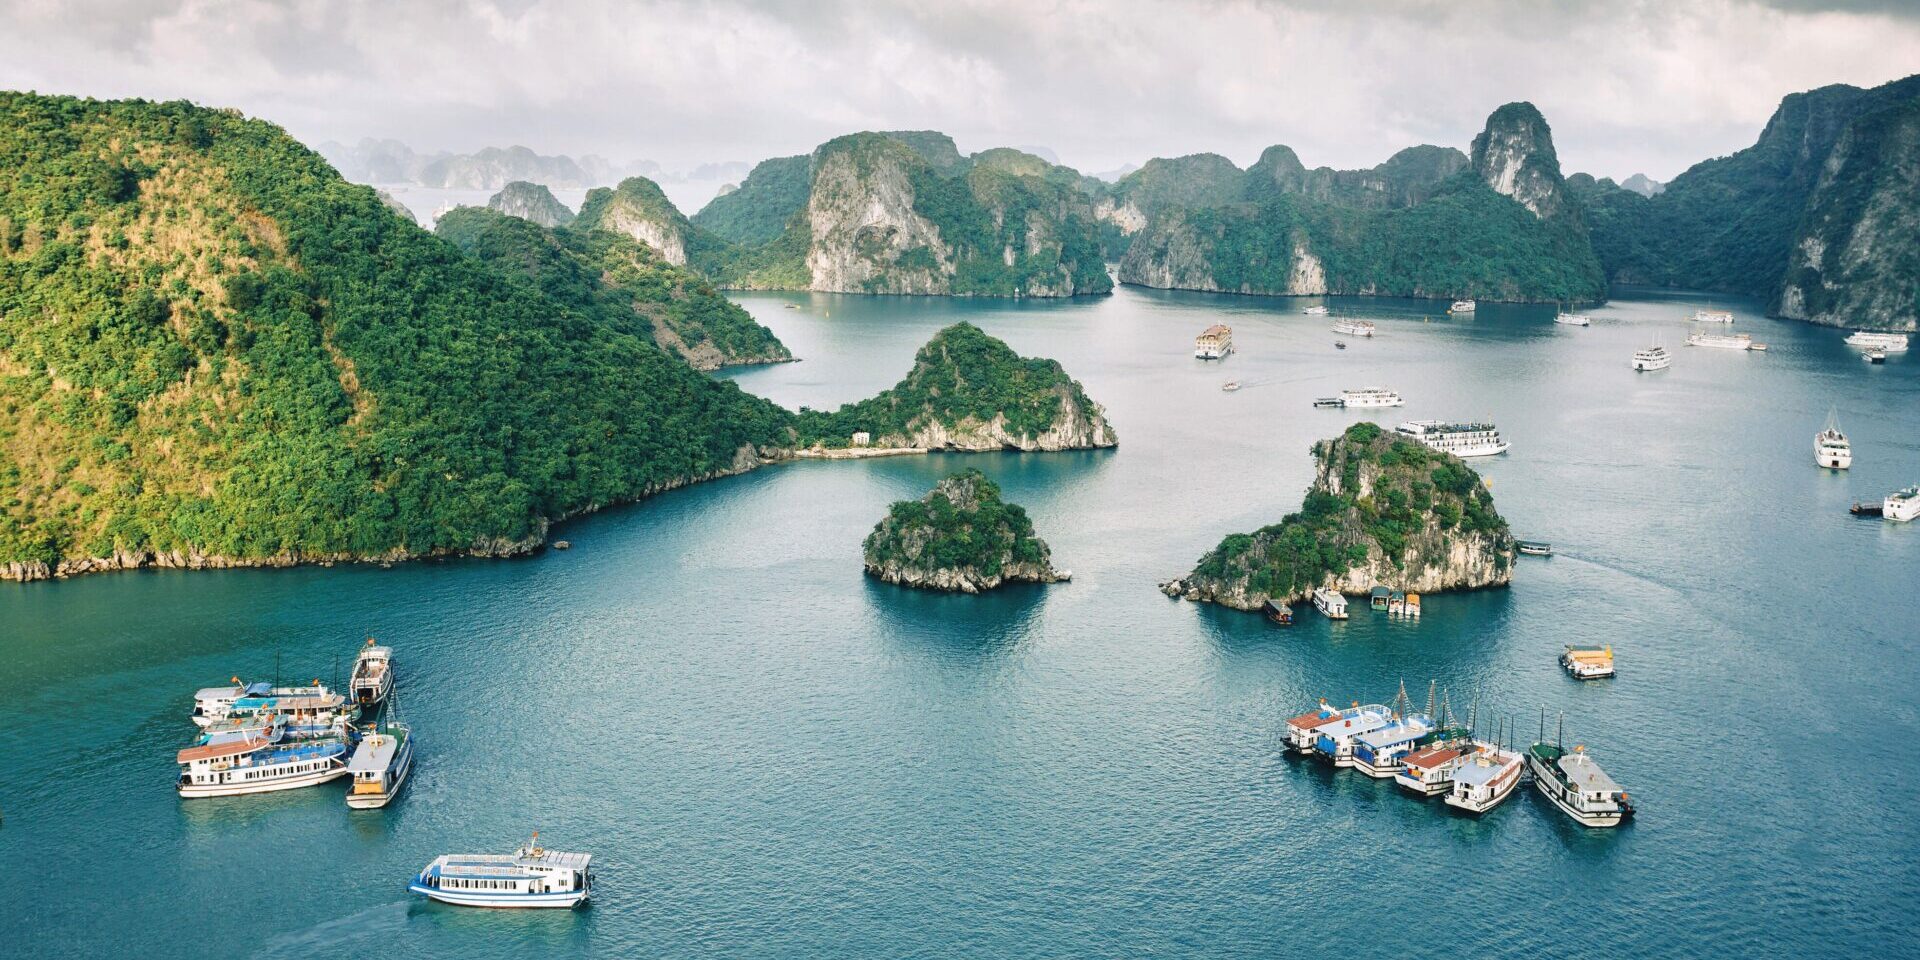 An aerial view of Halong Bay in Vietnam. Several boats can be seen traveling between green, mountainous islands.